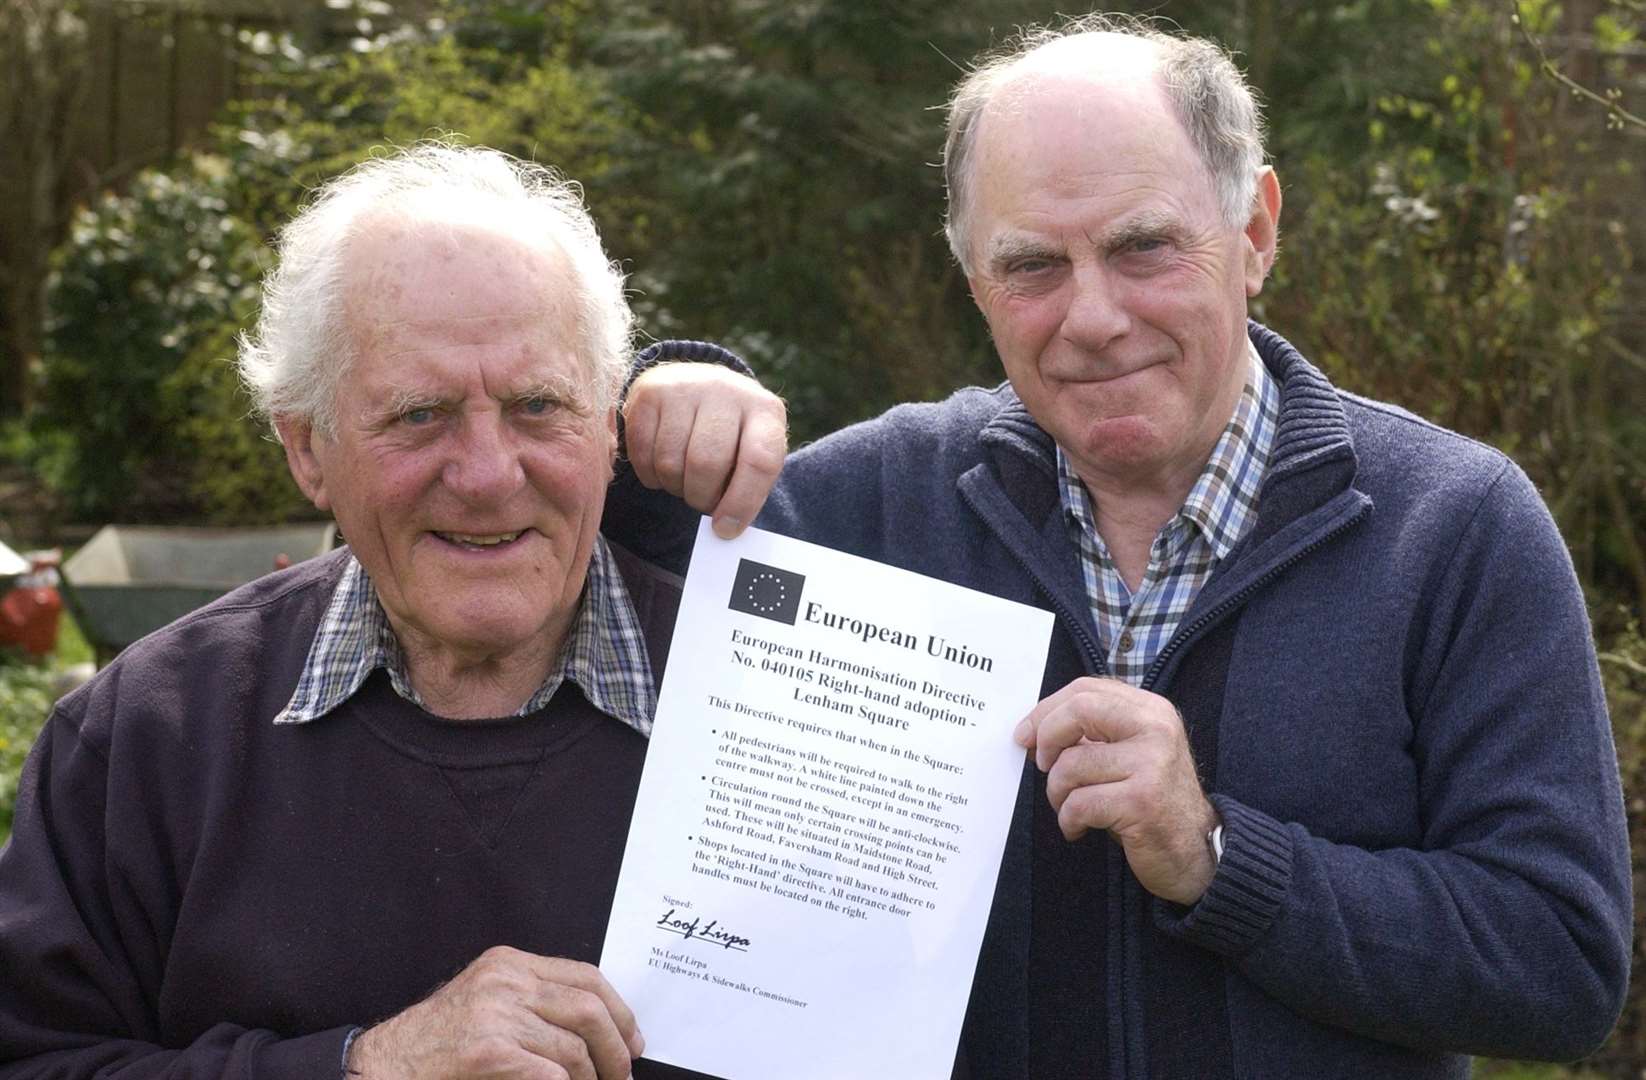 John Philpott and Alan Huggett with the sign about new rules in Lenham, April Fool's Day 2005